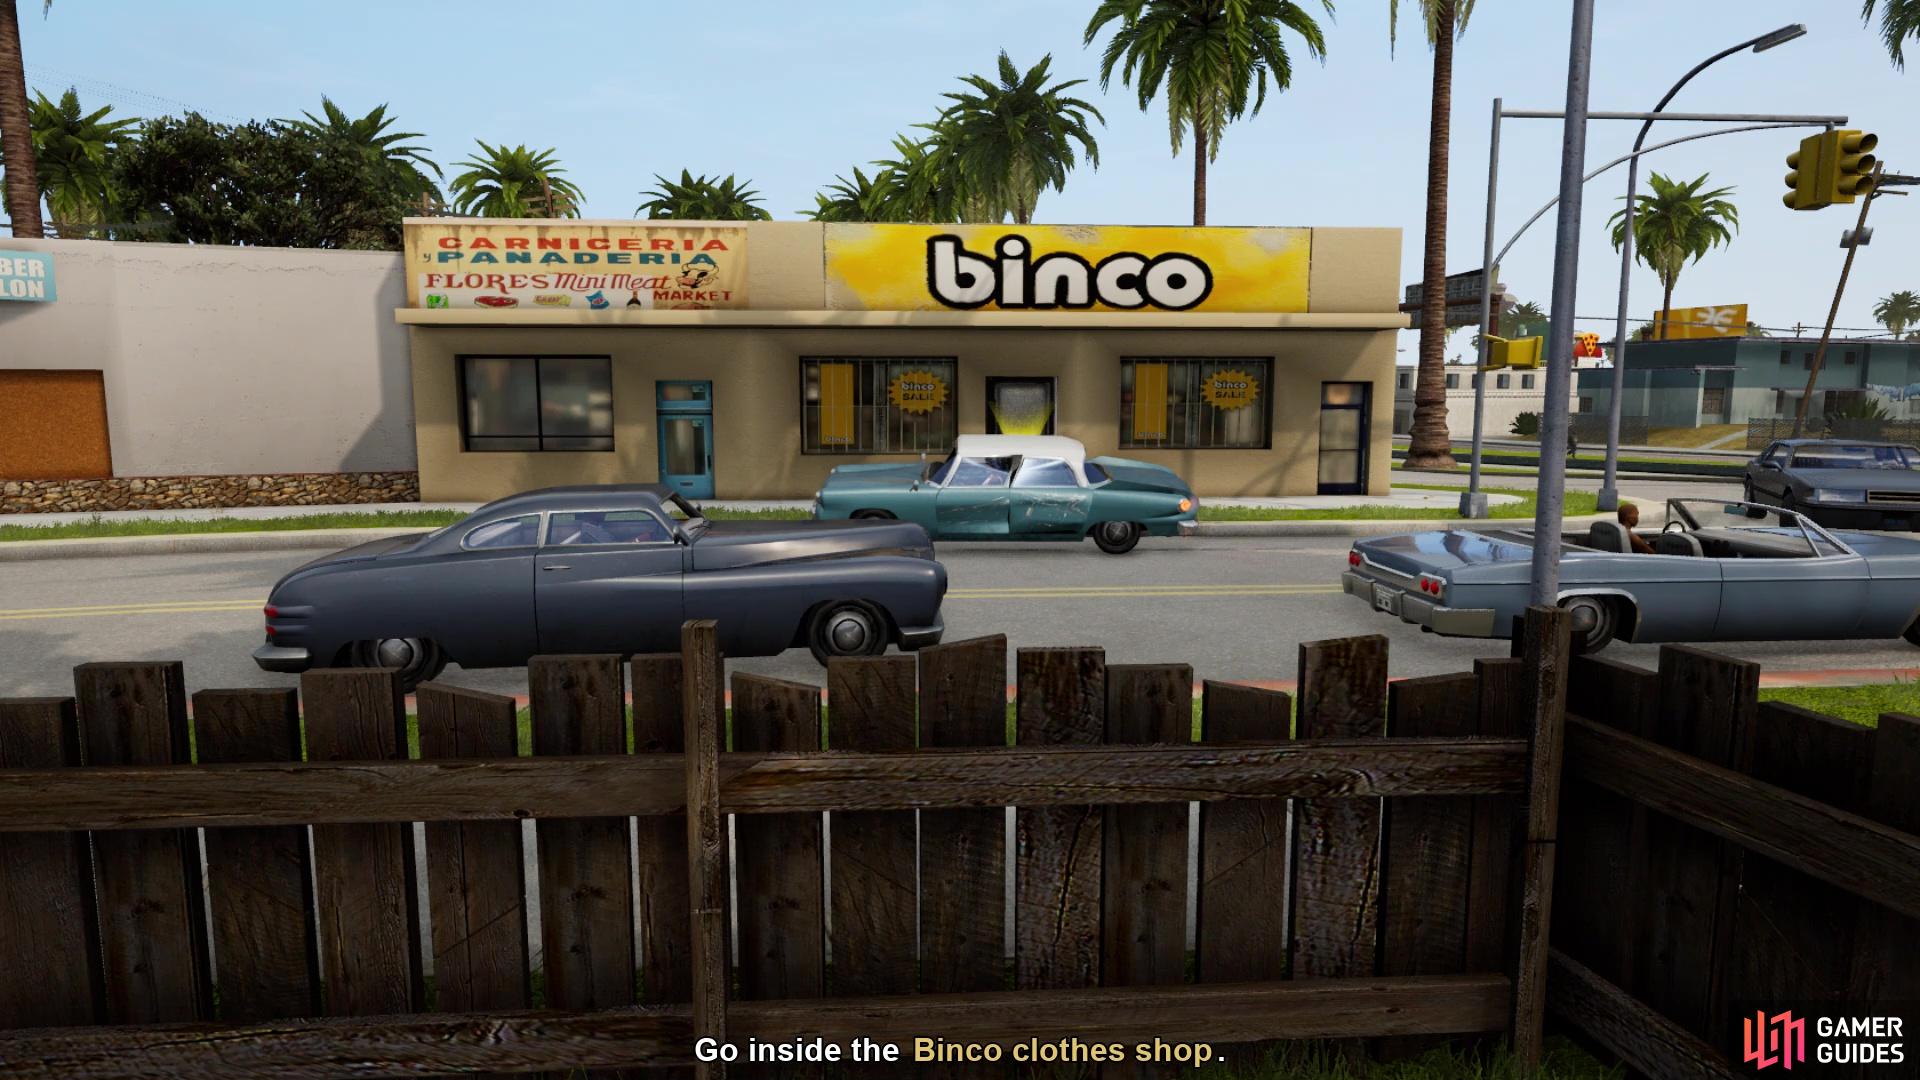 Binco is the first clothing store that will become unlocked